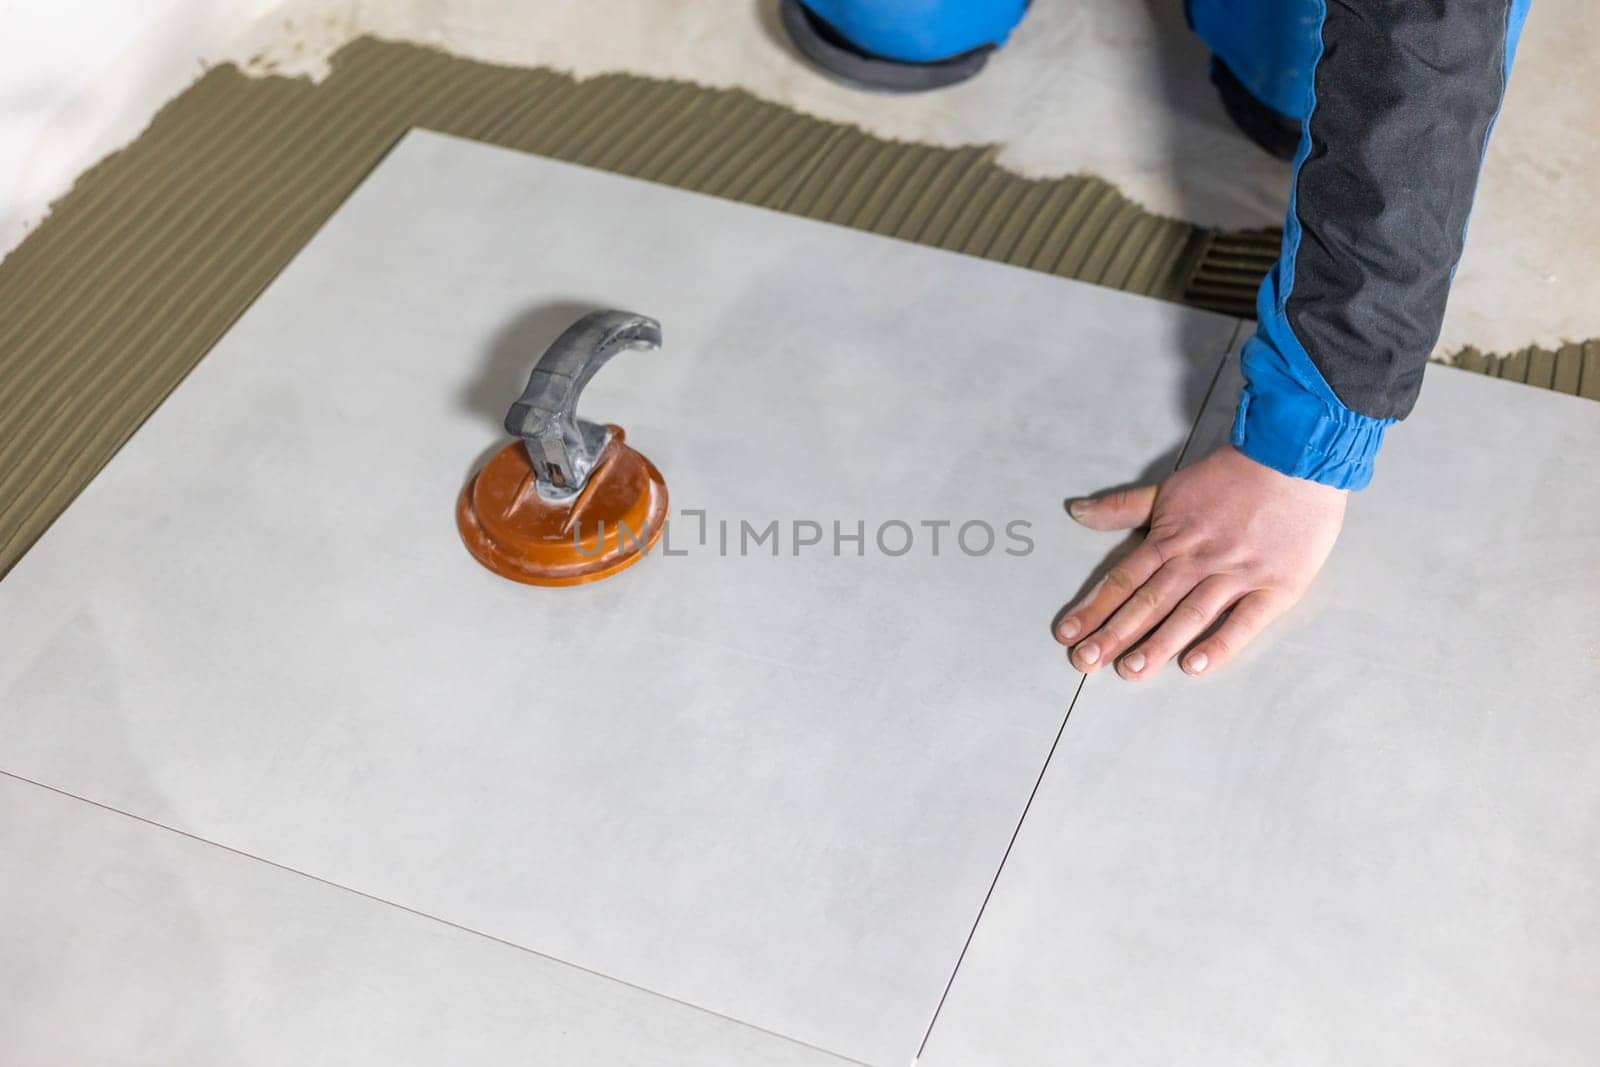 Tiler worker placing or tiling gray ceramic tile in a position over adhesive glue with lash tile leveling system, renovation or recontruction, concept of building